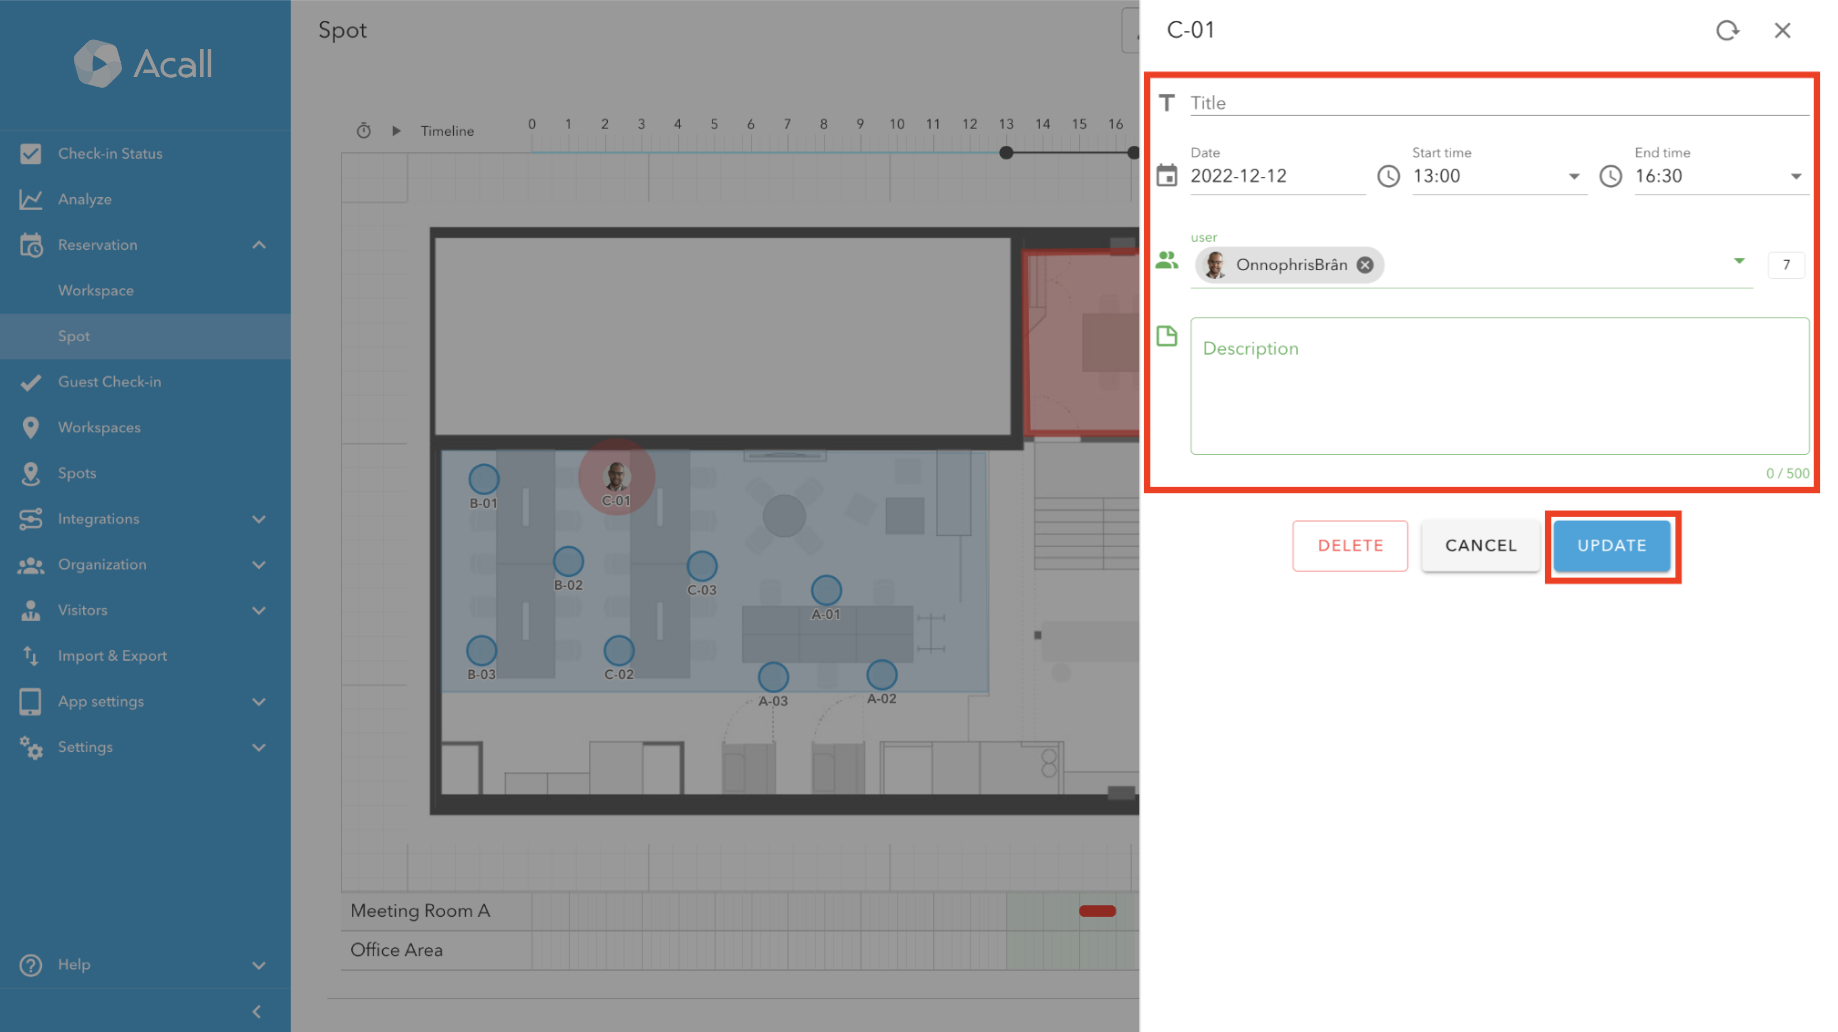 Reserve Your Spot on Floor Map on Acall Portal13.png